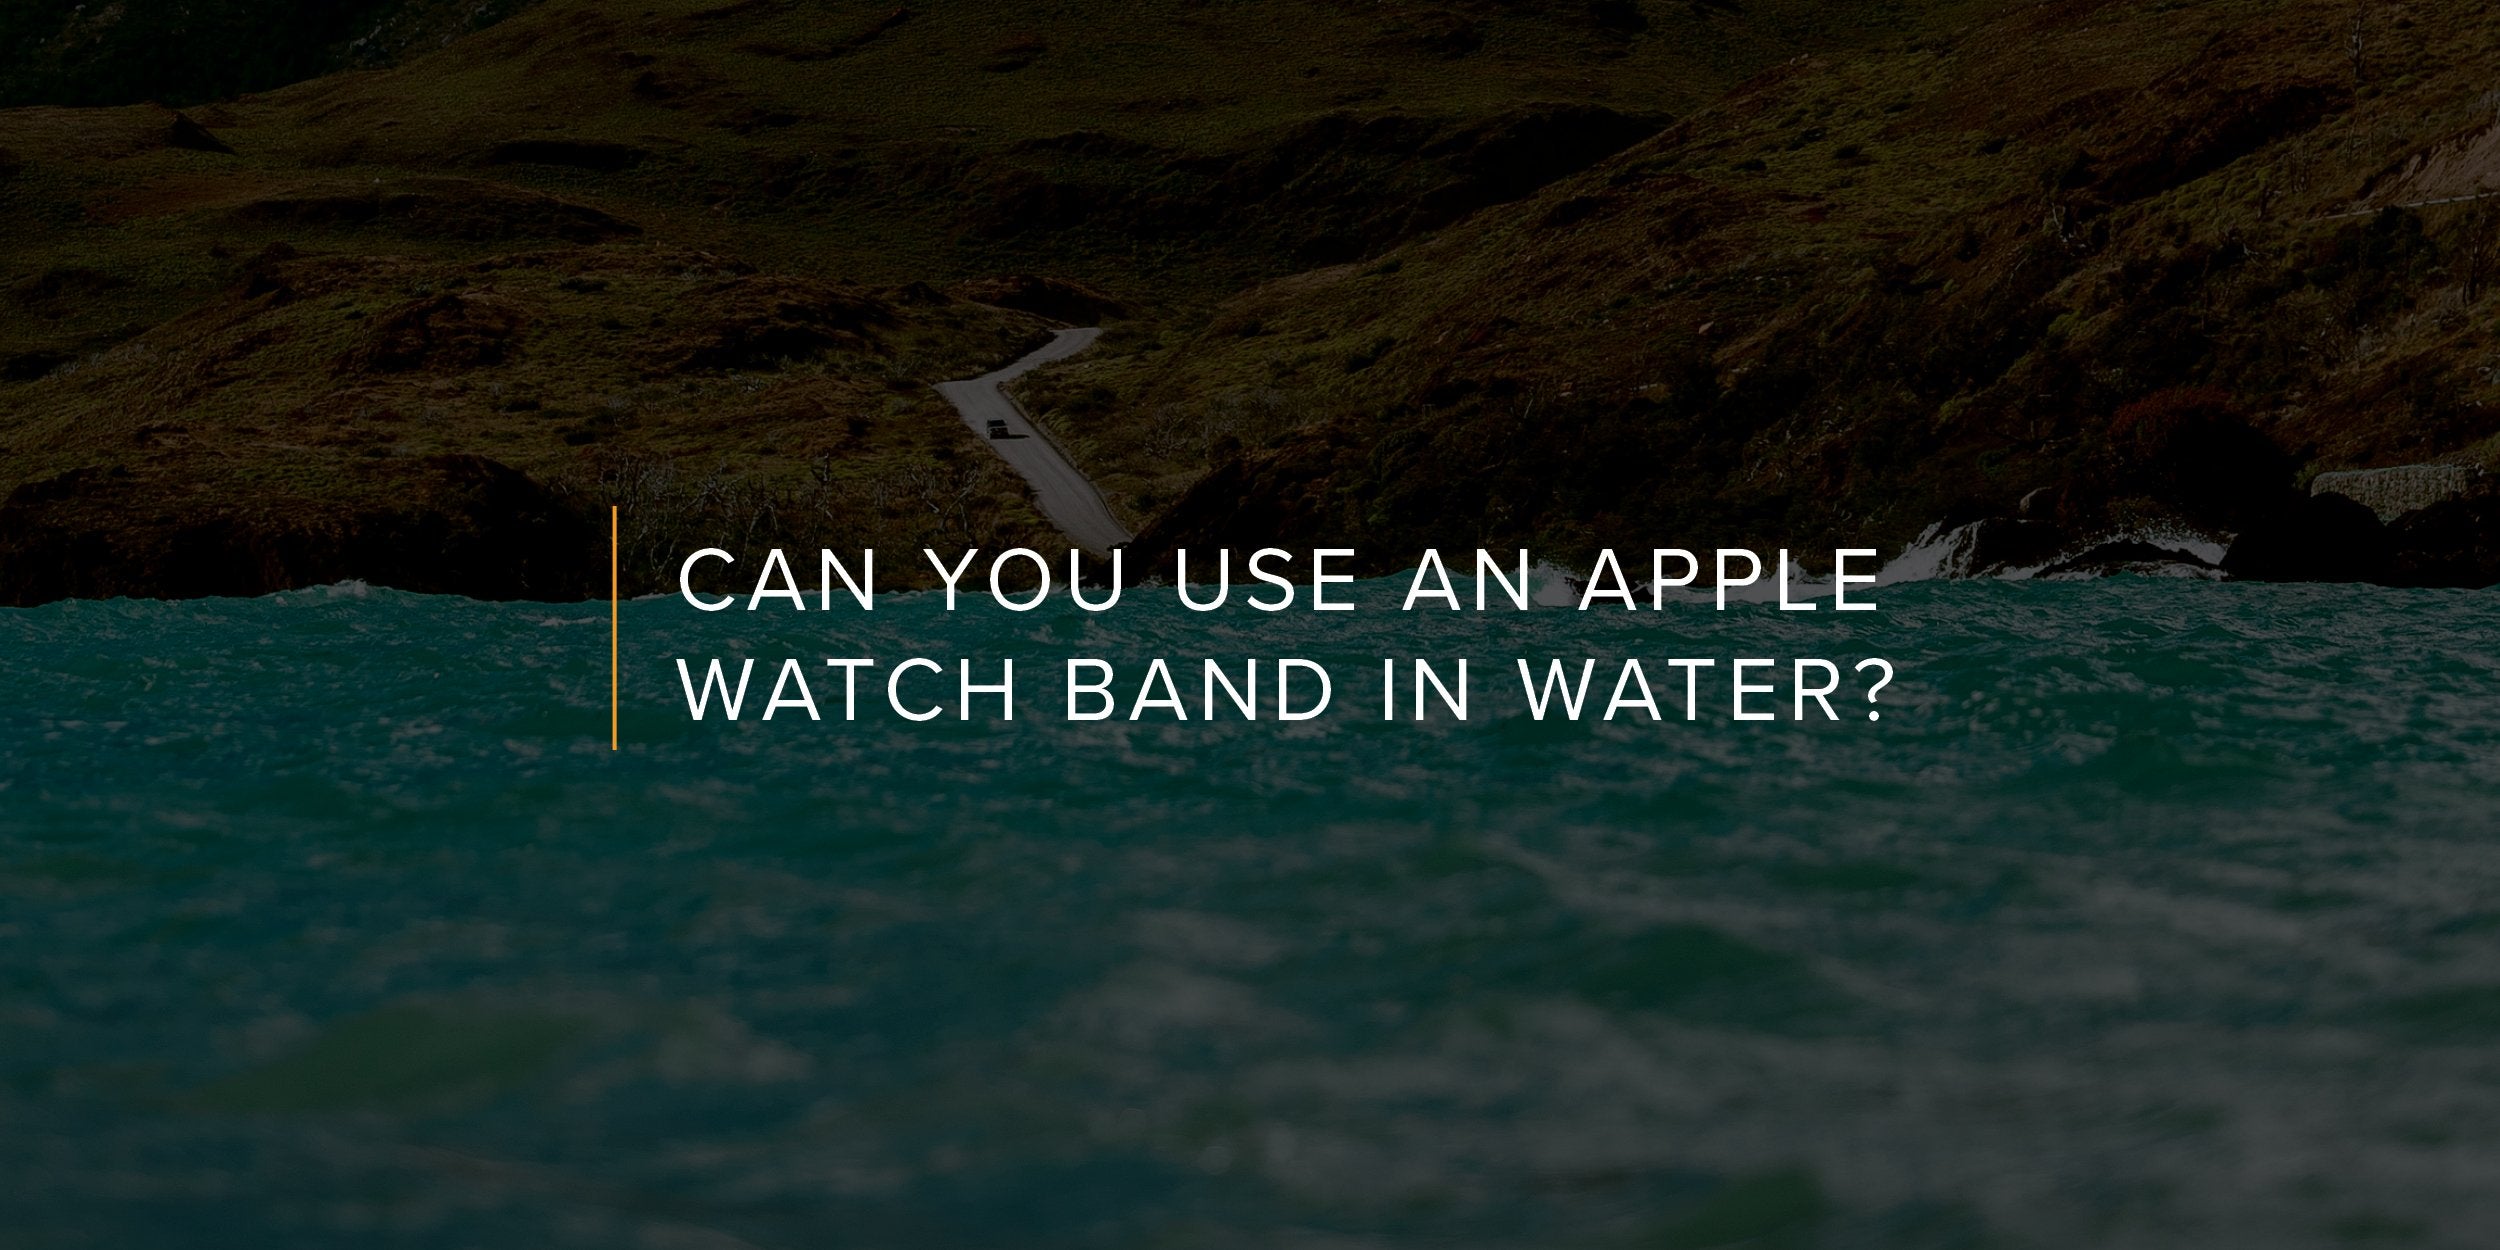 CAN YOU USE AN APPLE WATCH BAND IN WATER?